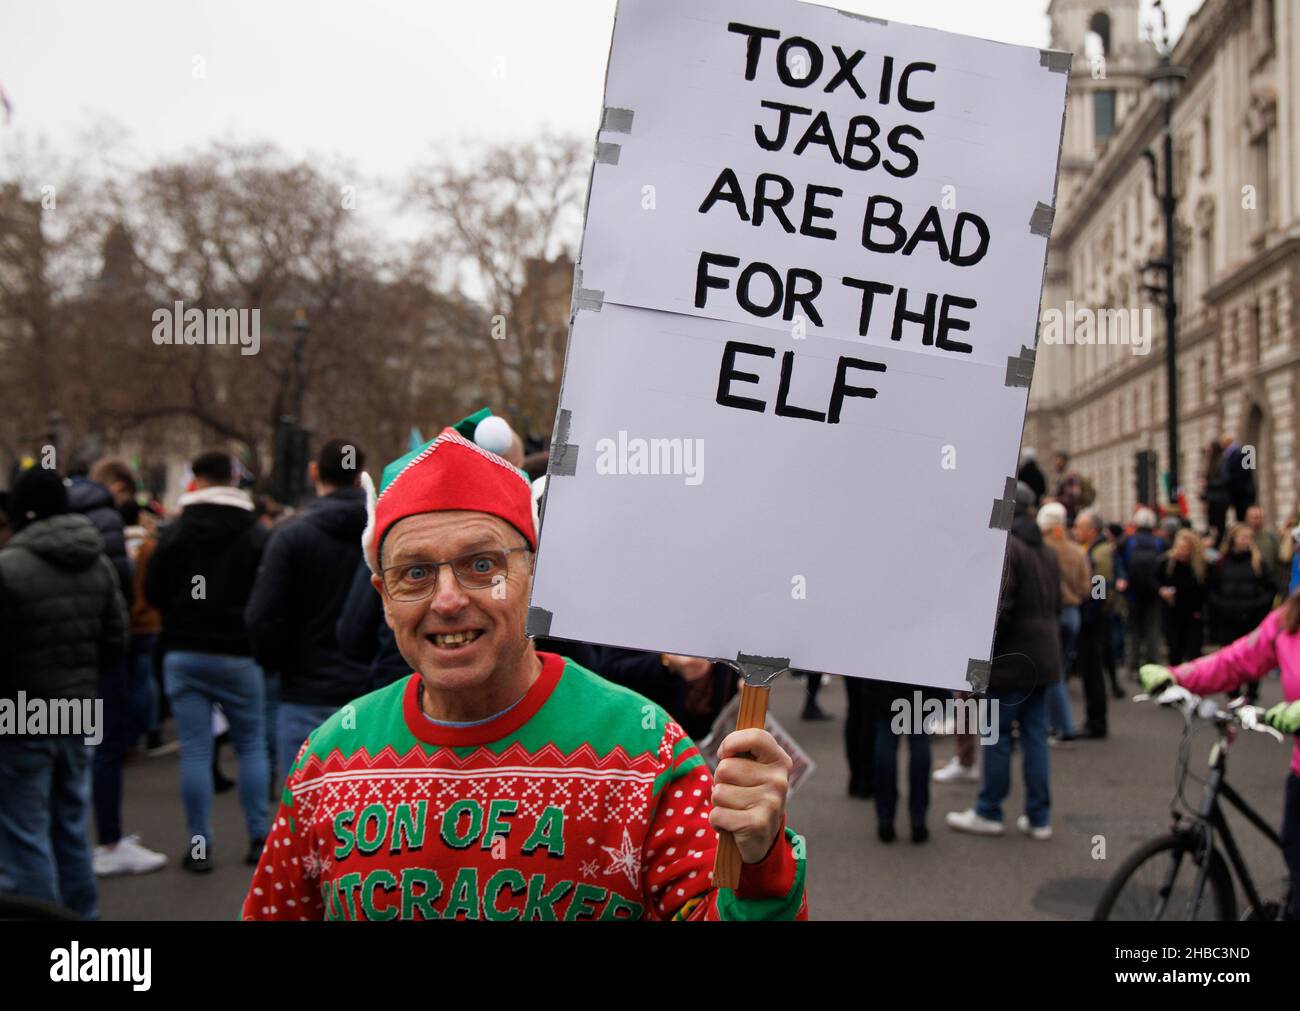 London, UK. 18th Dec, 2021. Thousands of Antivaxx Protestors demonstrate in Central London. They are opposed to the vaccine and believe that the Government is misleading the public. They dont wear masks and don't agree with having a vaccine. Credit: Tommy London/Alamy Live News Stock Photo